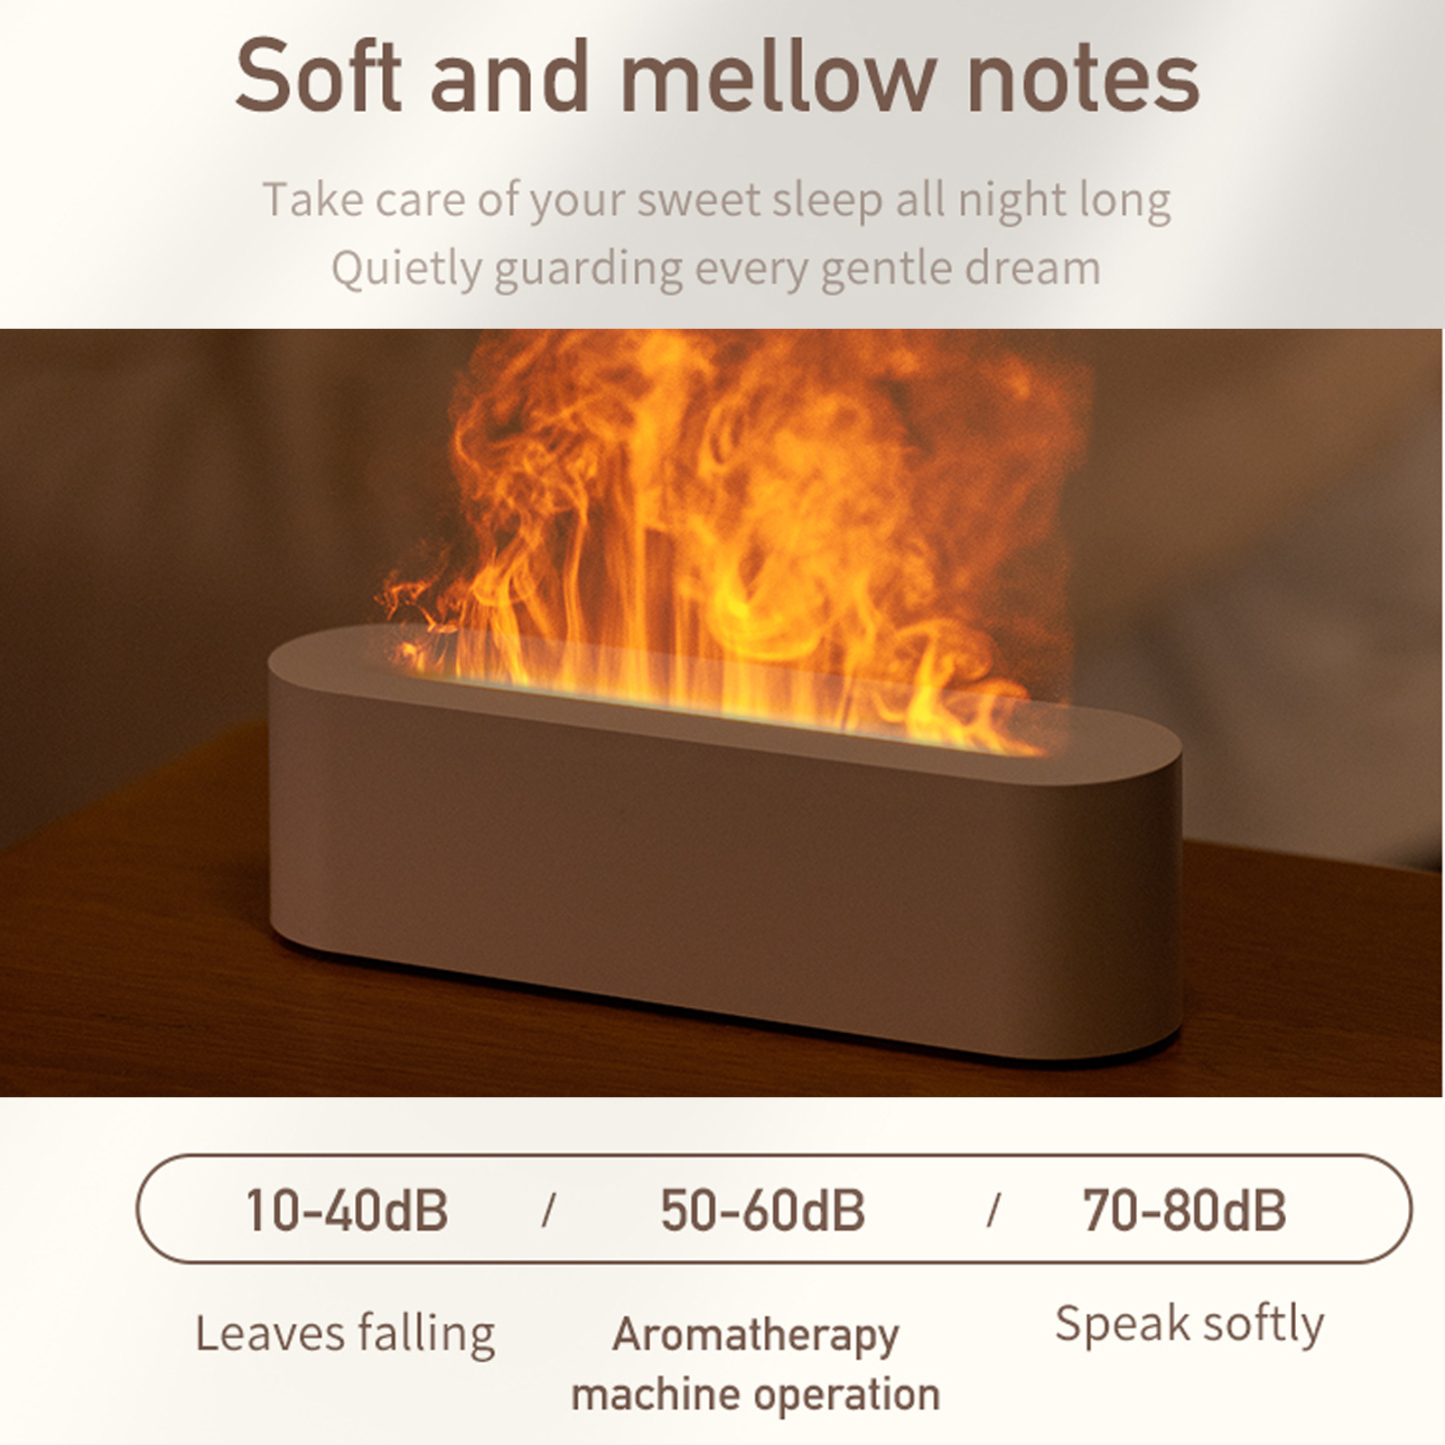 USB Ultrasonic Aroma Air Humidifier Flame Light Purifier Essential Oil Diffuser